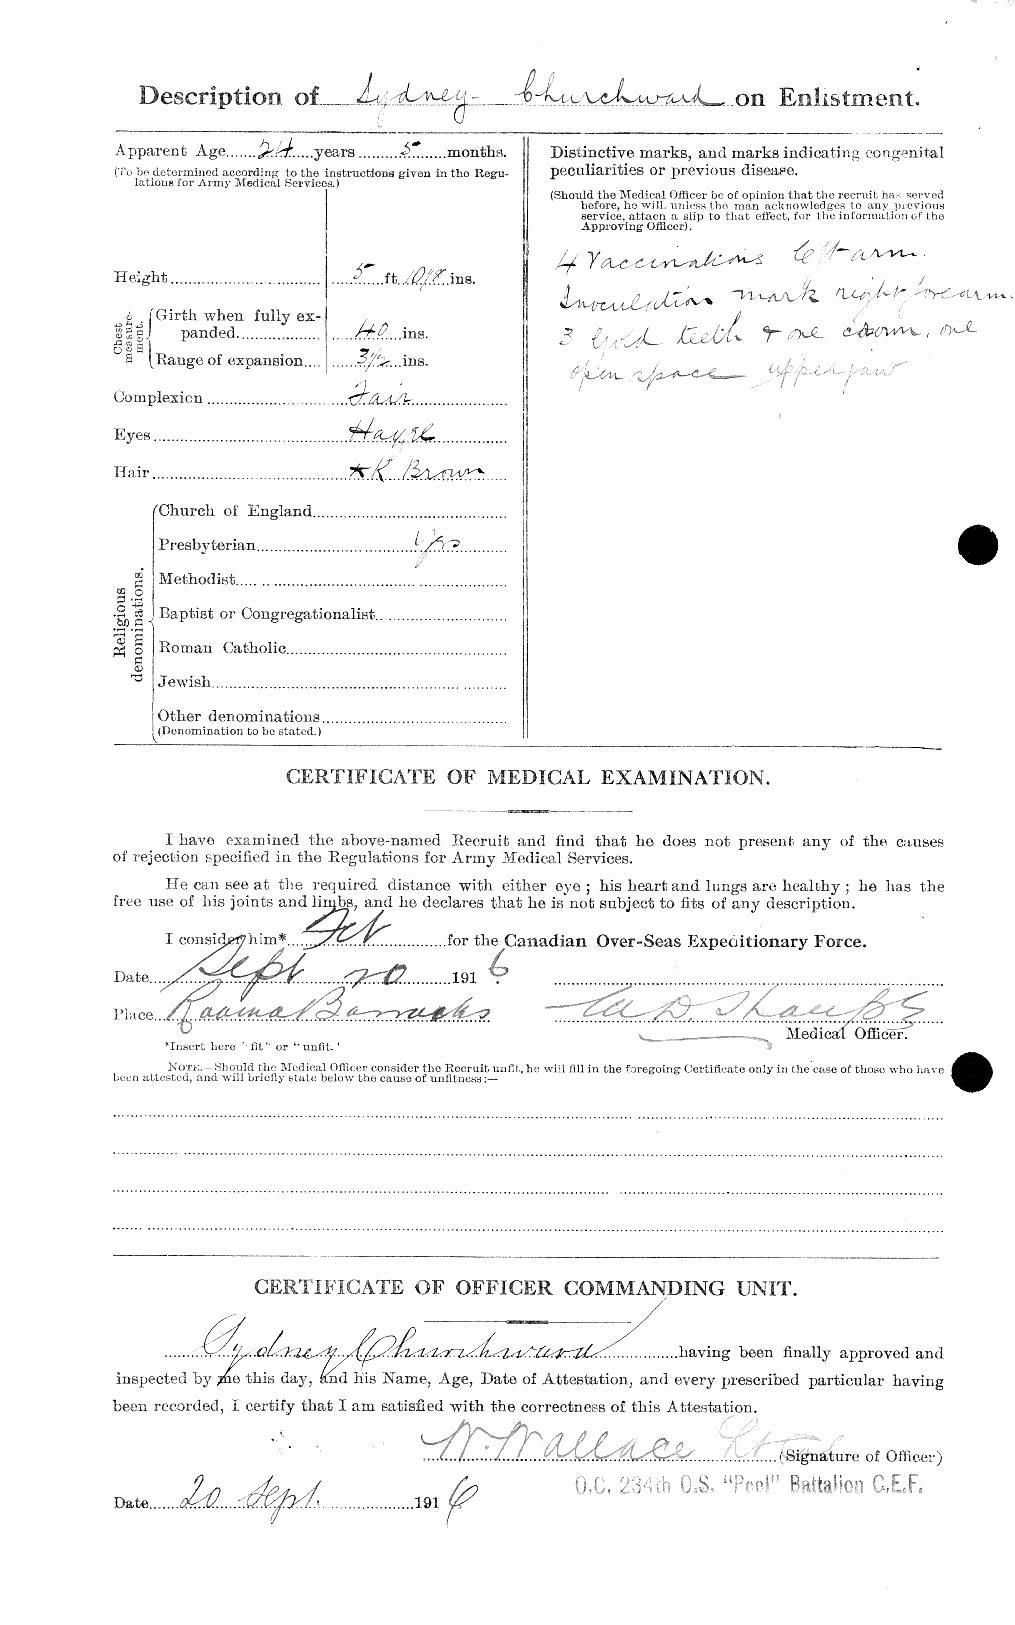 Personnel Records of the First World War - CEF 022522b